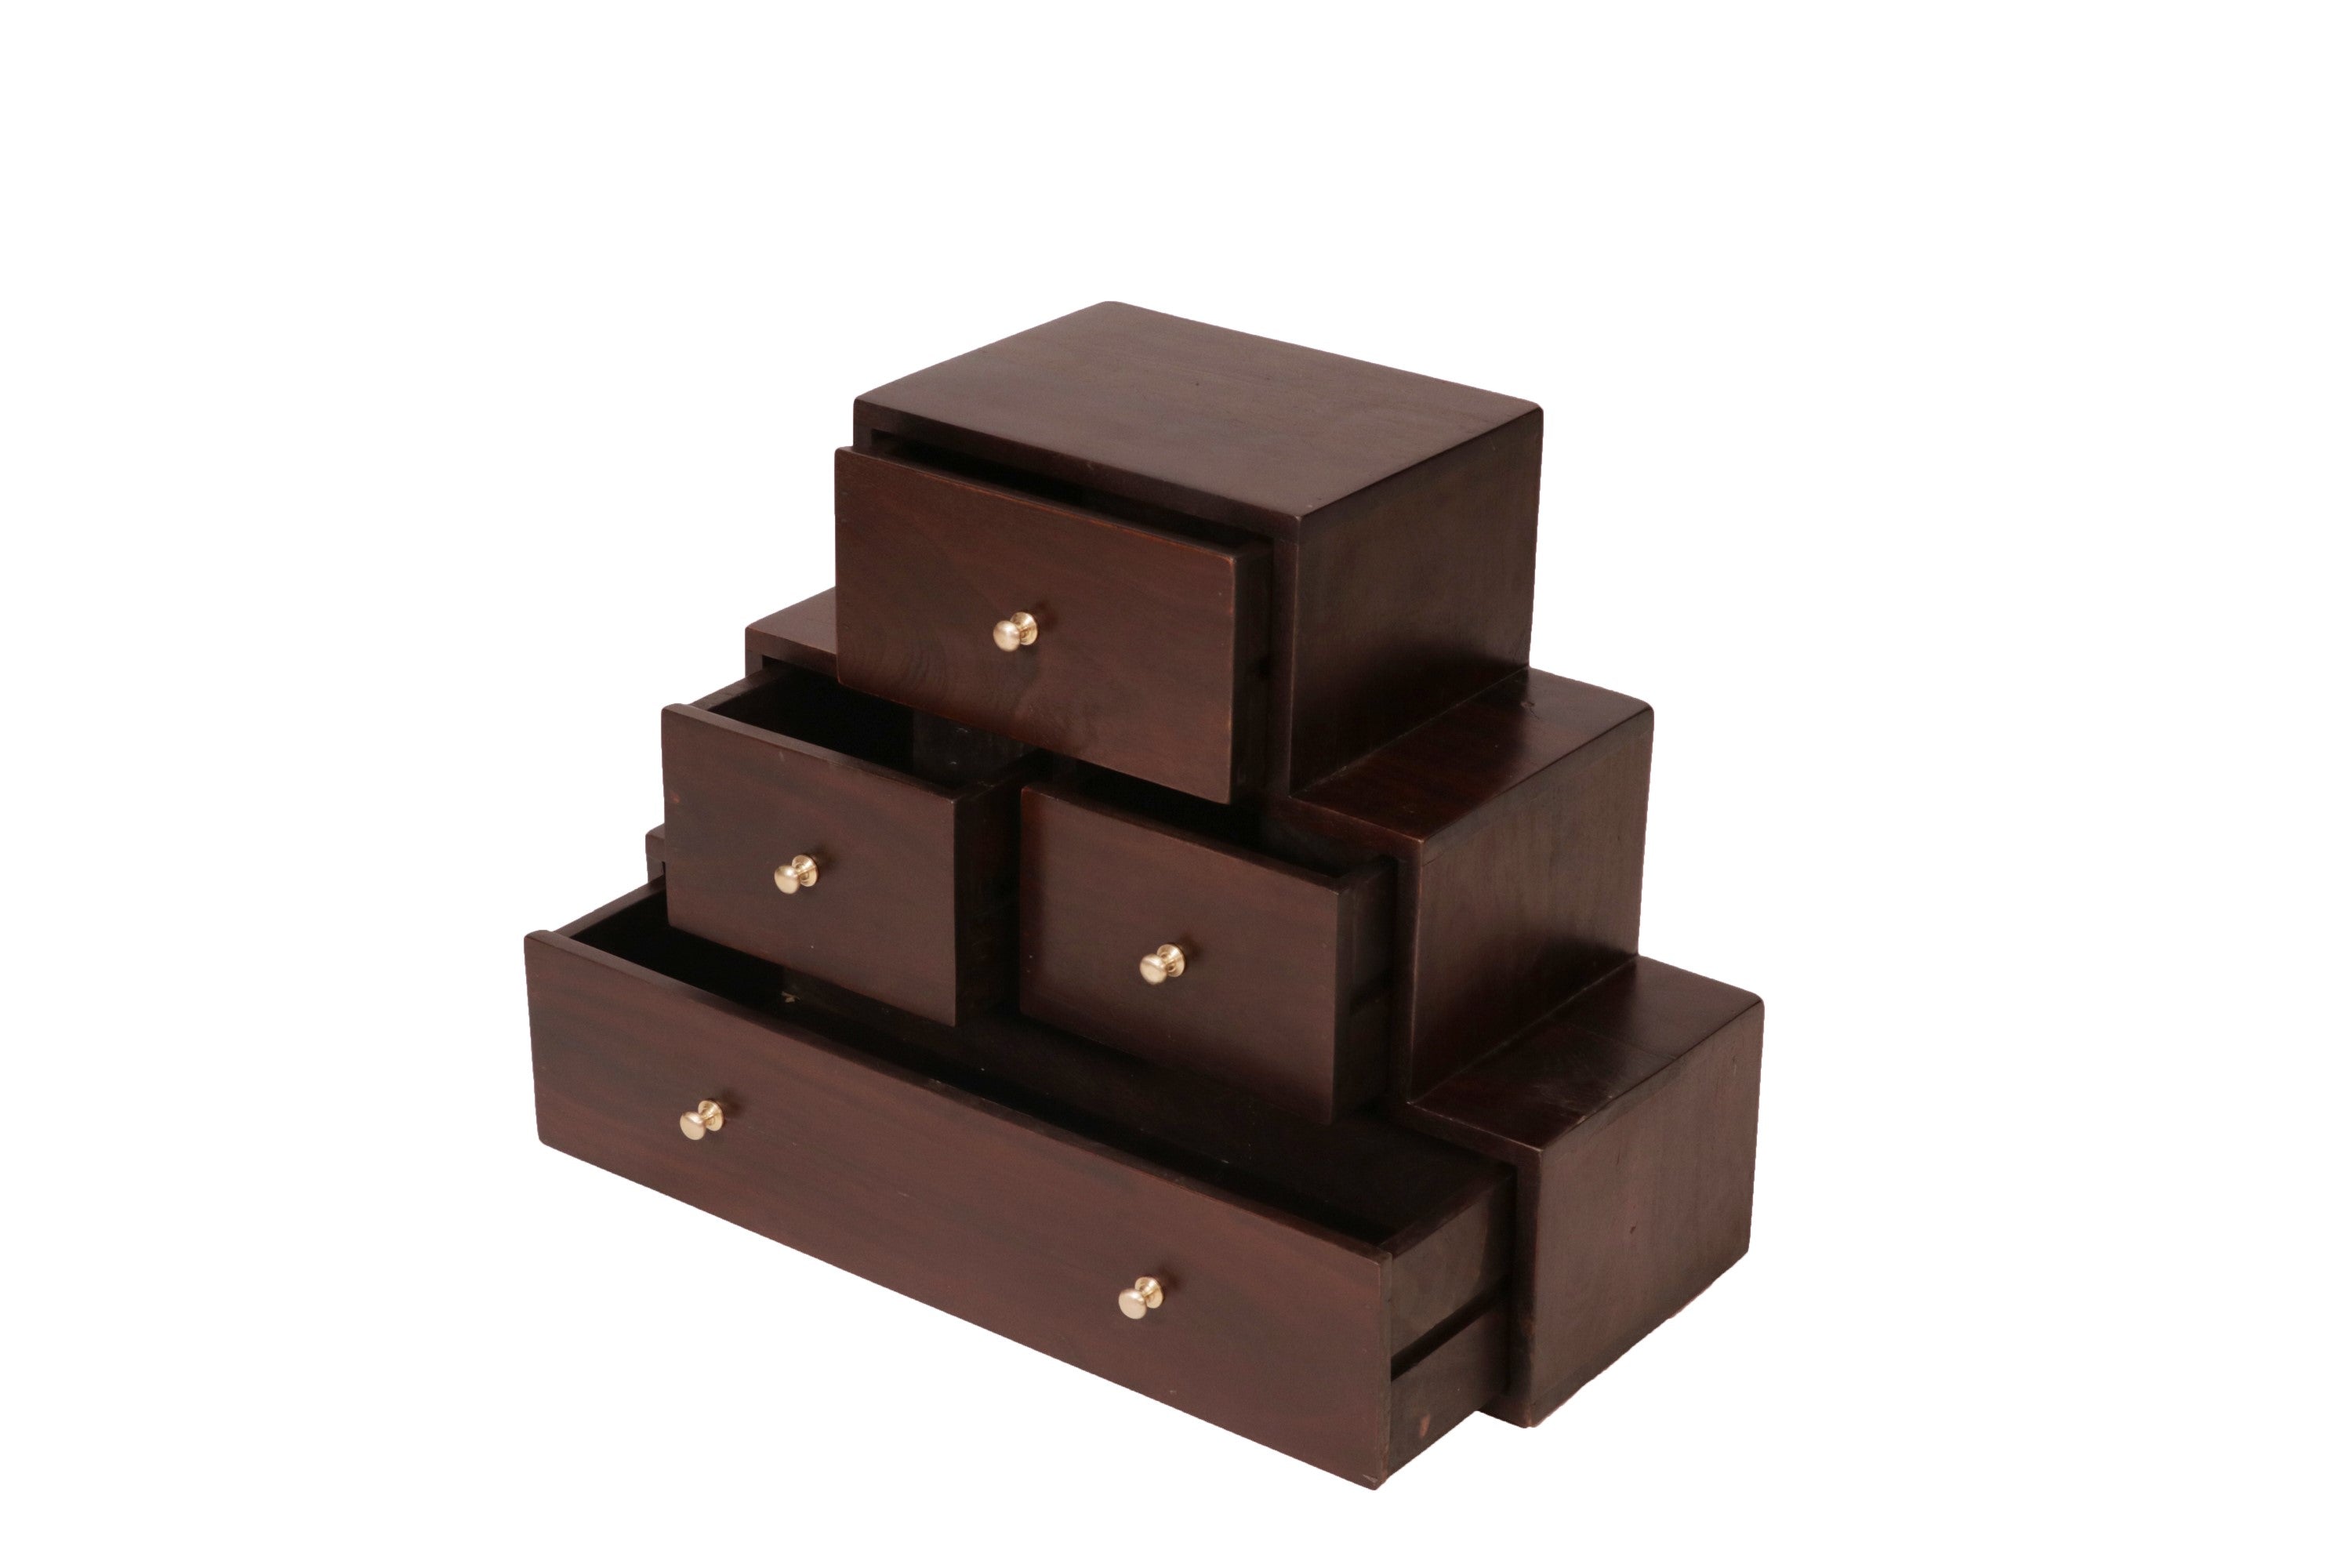 Wooden Tower Drawer Chest Drawer's Chest